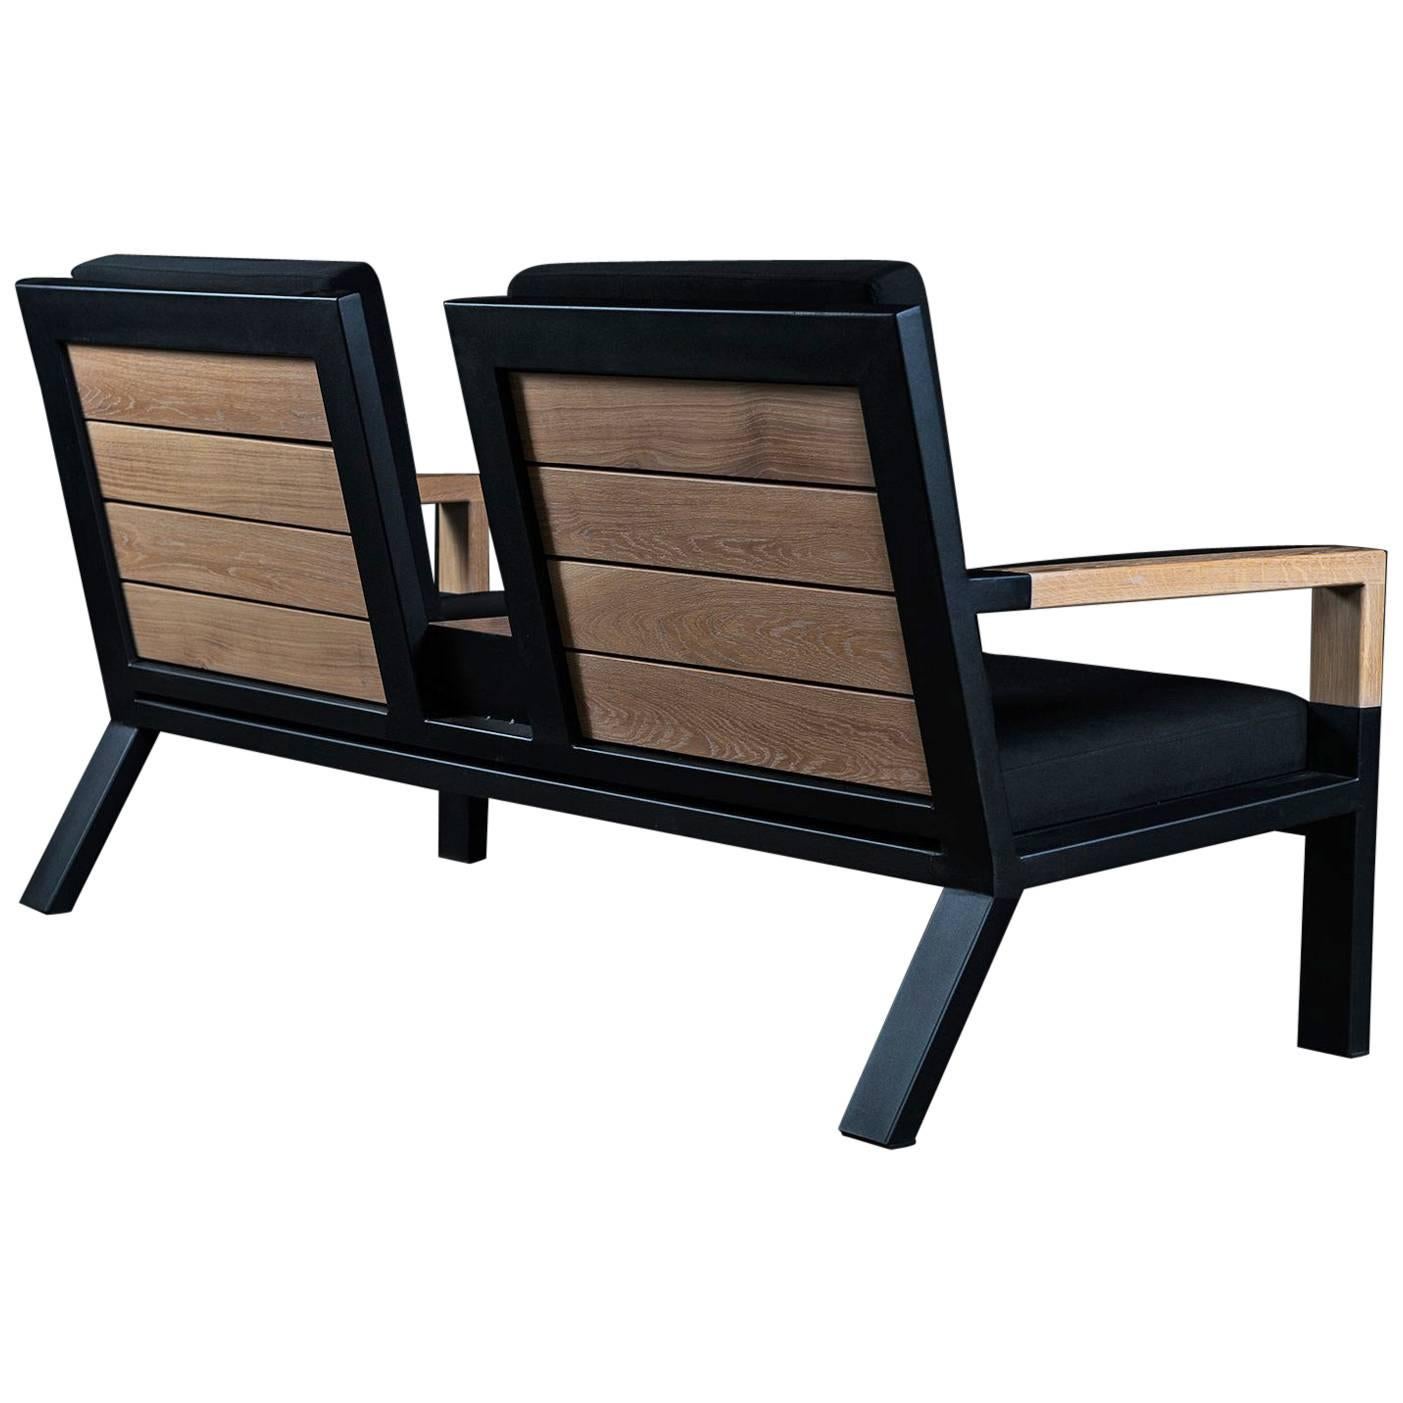 Baltimore Armchair Duo by Ambrozia, White Oak, Black Steel and Black Upholestry